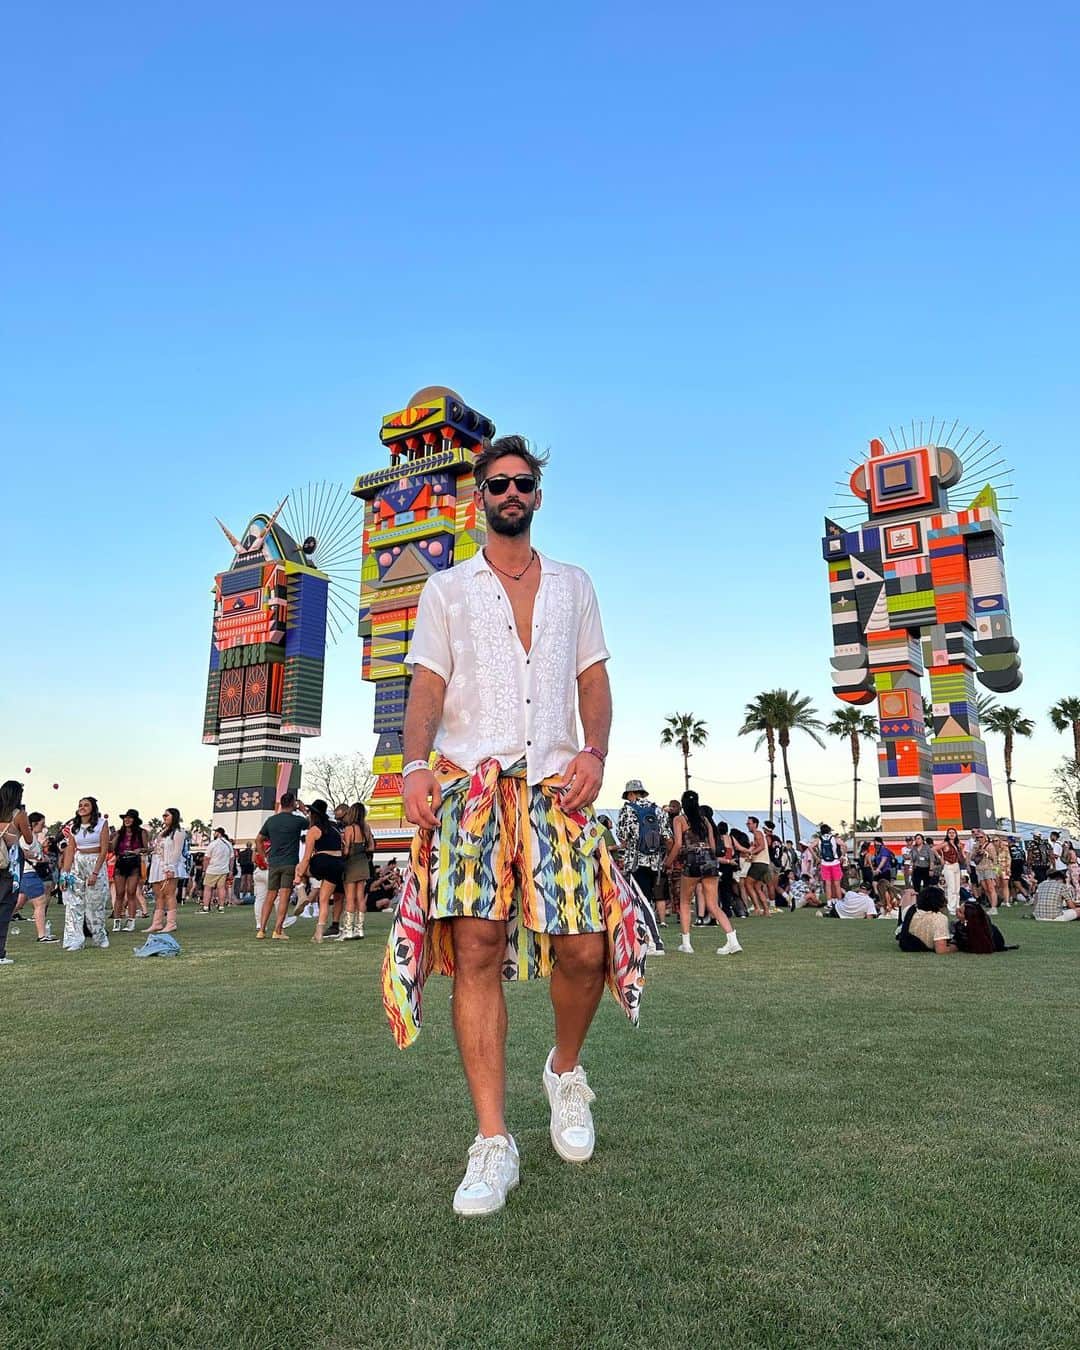 Ricardo Baldinのインスタグラム：「It’s been 10 years since I first attended Coachella. Back then I knew almost none of the artists, and that’s no excuse not to go, cause honestly, getting to know new good artists you didn’t know is fantastic. I learned about The XX that 2013. This was my sixth year, first since 2018 when Beyoncé performed. Funny it kind of felt like the first, I’ve been learning more Brazilian music the past few years and knew just the classics like Blink 182, Gorillaz, Chemical Brothers etc. knowing I’d get there and learn about the novelties.   After 3 busy days…Well here is the list of highlights: 1 - ROSALÍA, like a magnetism we were in front of the main stage when she was just starting the show, and forget about it. She is just out of this world, what a performance! 2 - Kaytranada - FISHER & Chris Lake - SG Lewis These were 3 amazing performances of artists I didn’t know and became fan, all happening on Outdoor stage, where the classics Eric Prydz and Chemical Brothers also performed. 3 - Trust the main stage - from Sunset to the end of festival main stage is packed. Bad Bunny had an amazing concert full of energy and It was fun singing my teenager times songs with Gorillaz and Blink 182.   I find it really amazing to attend such festivals. I feel It’s like a big body composed of dozens of thousands of people, each one with their story, tastes and expectations, but above all, everyone just wanting to have a good time and no prejudices, so it’s a big union of people wanting the same thing creating the best environment for you to be free and enjoy yourself the way you want.  Shoutout to my brother @1fabionunes who was together on Coachella 2013 and now again killing it on the dance floors. @caseyfatch 🐞 Also @theragaman my long time friends and partners who provide me the coolest outfits 🙏🏽  See you soon Coachella 🫶」